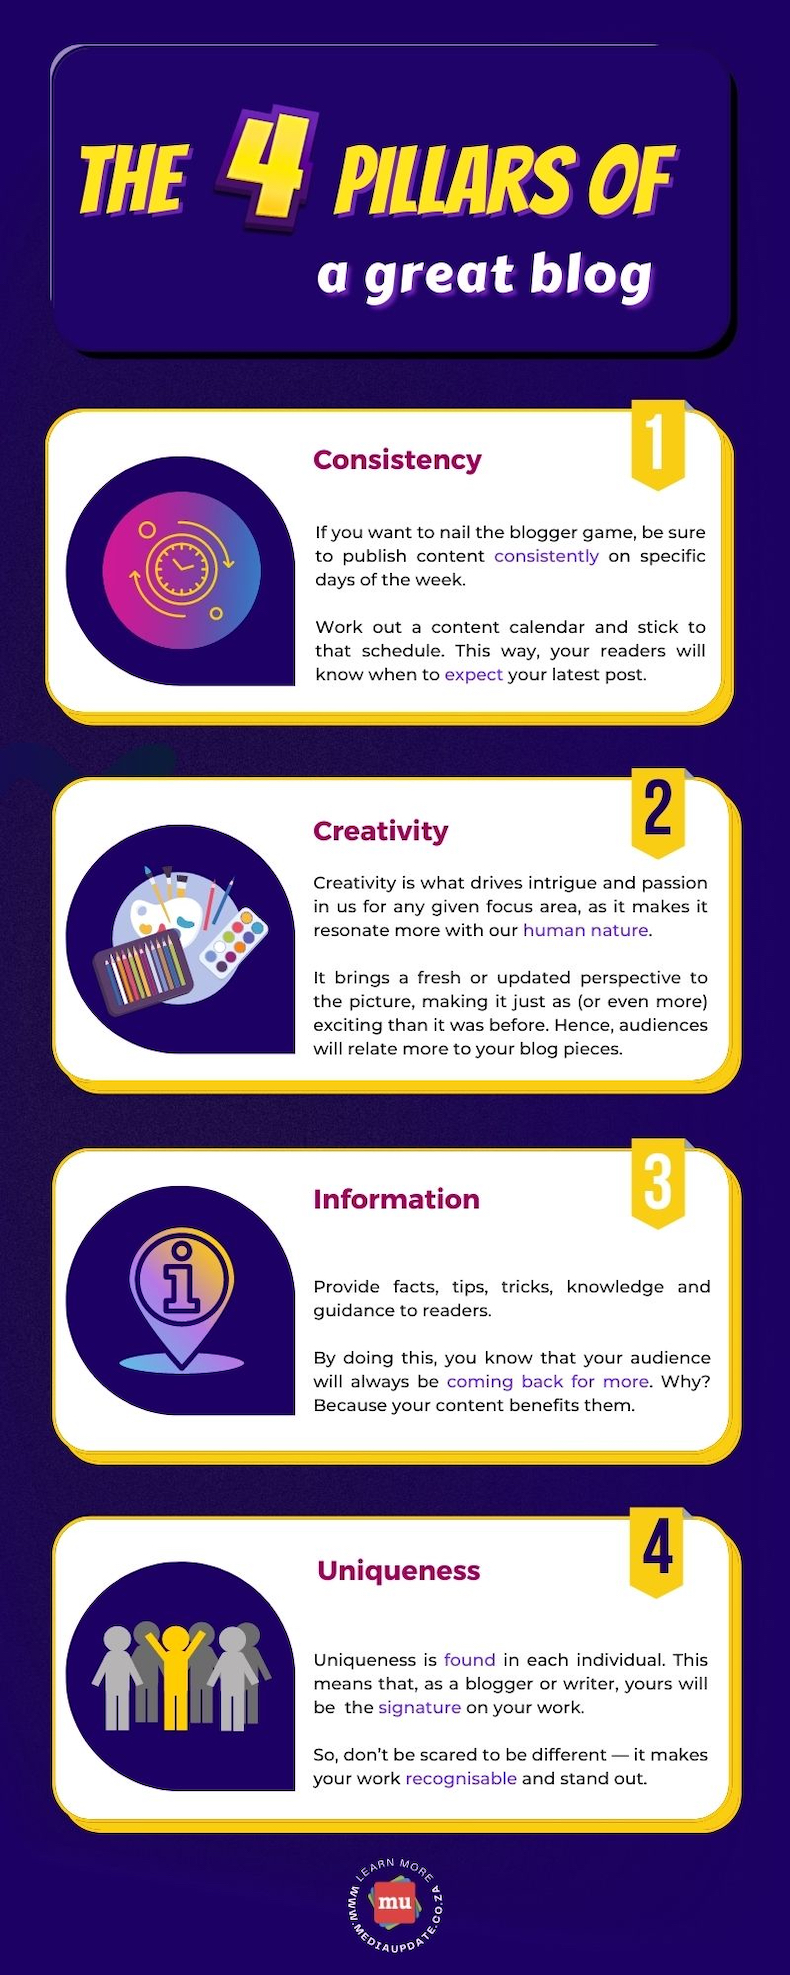 4 pillars of a great blog infographic